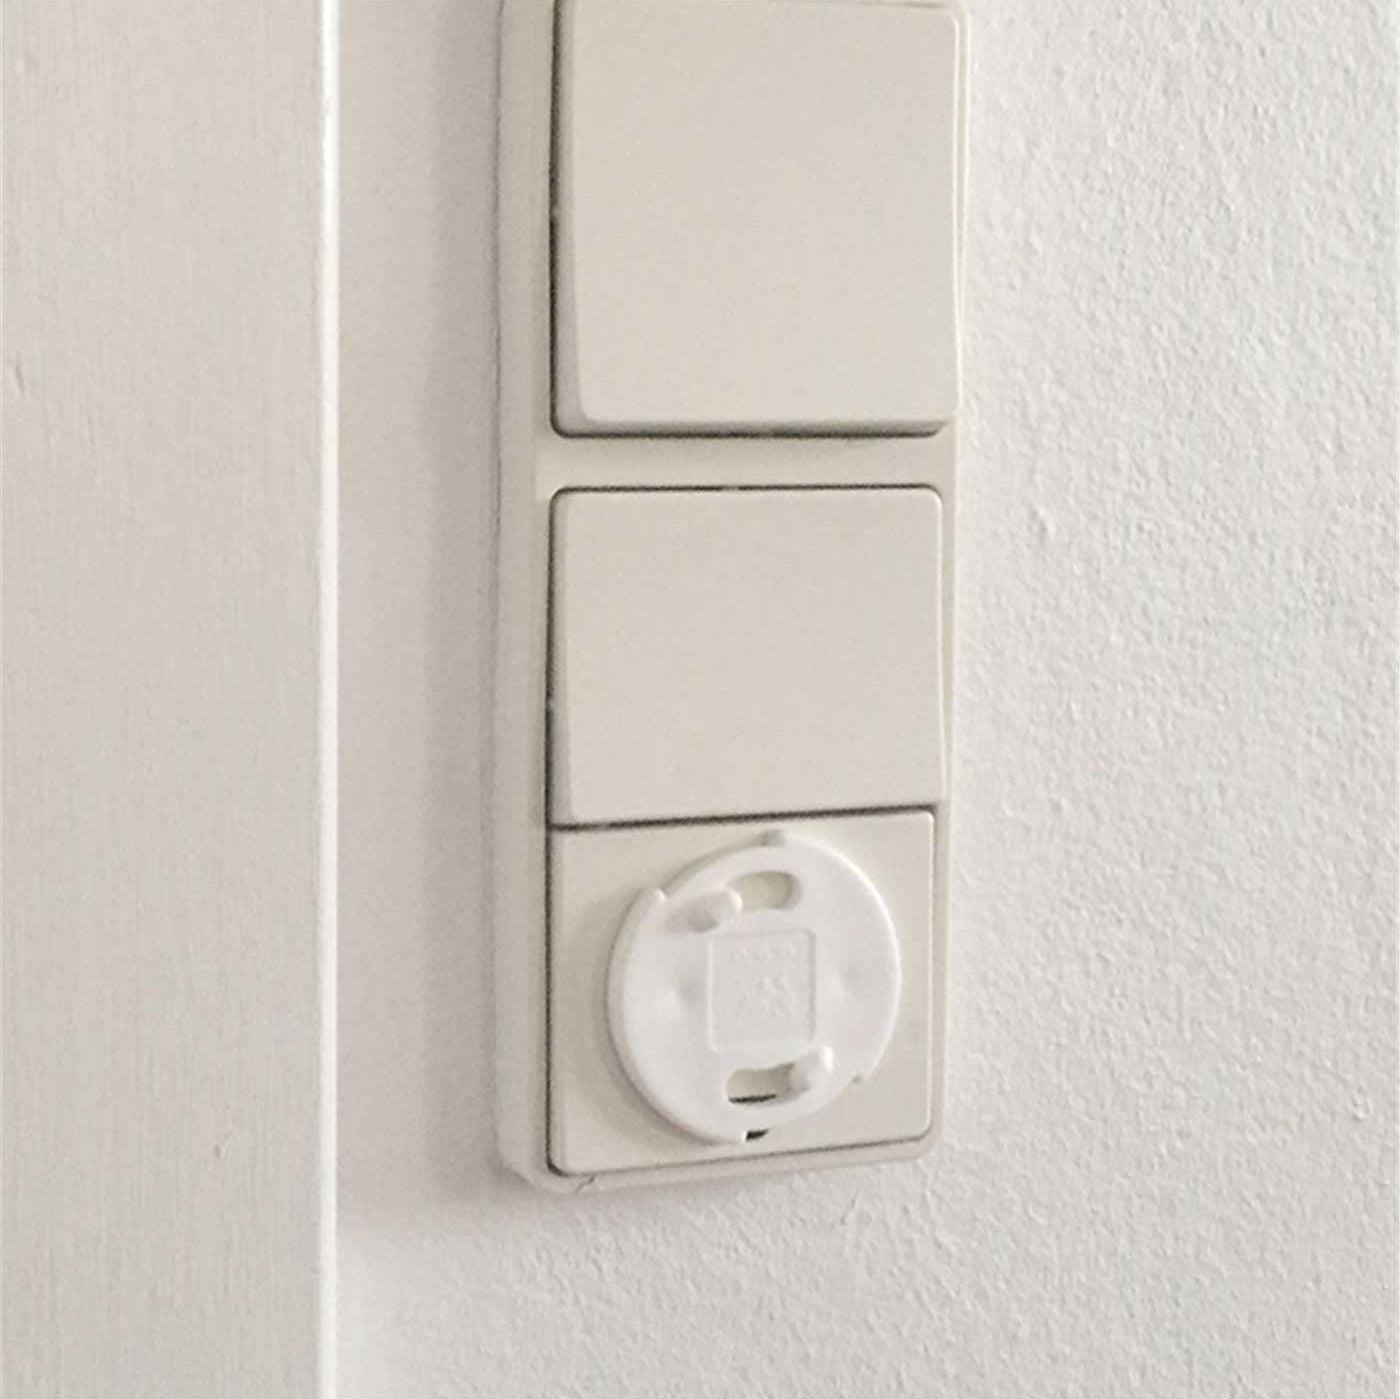 Baby Dan: Safety Plug electrical outlet plugs